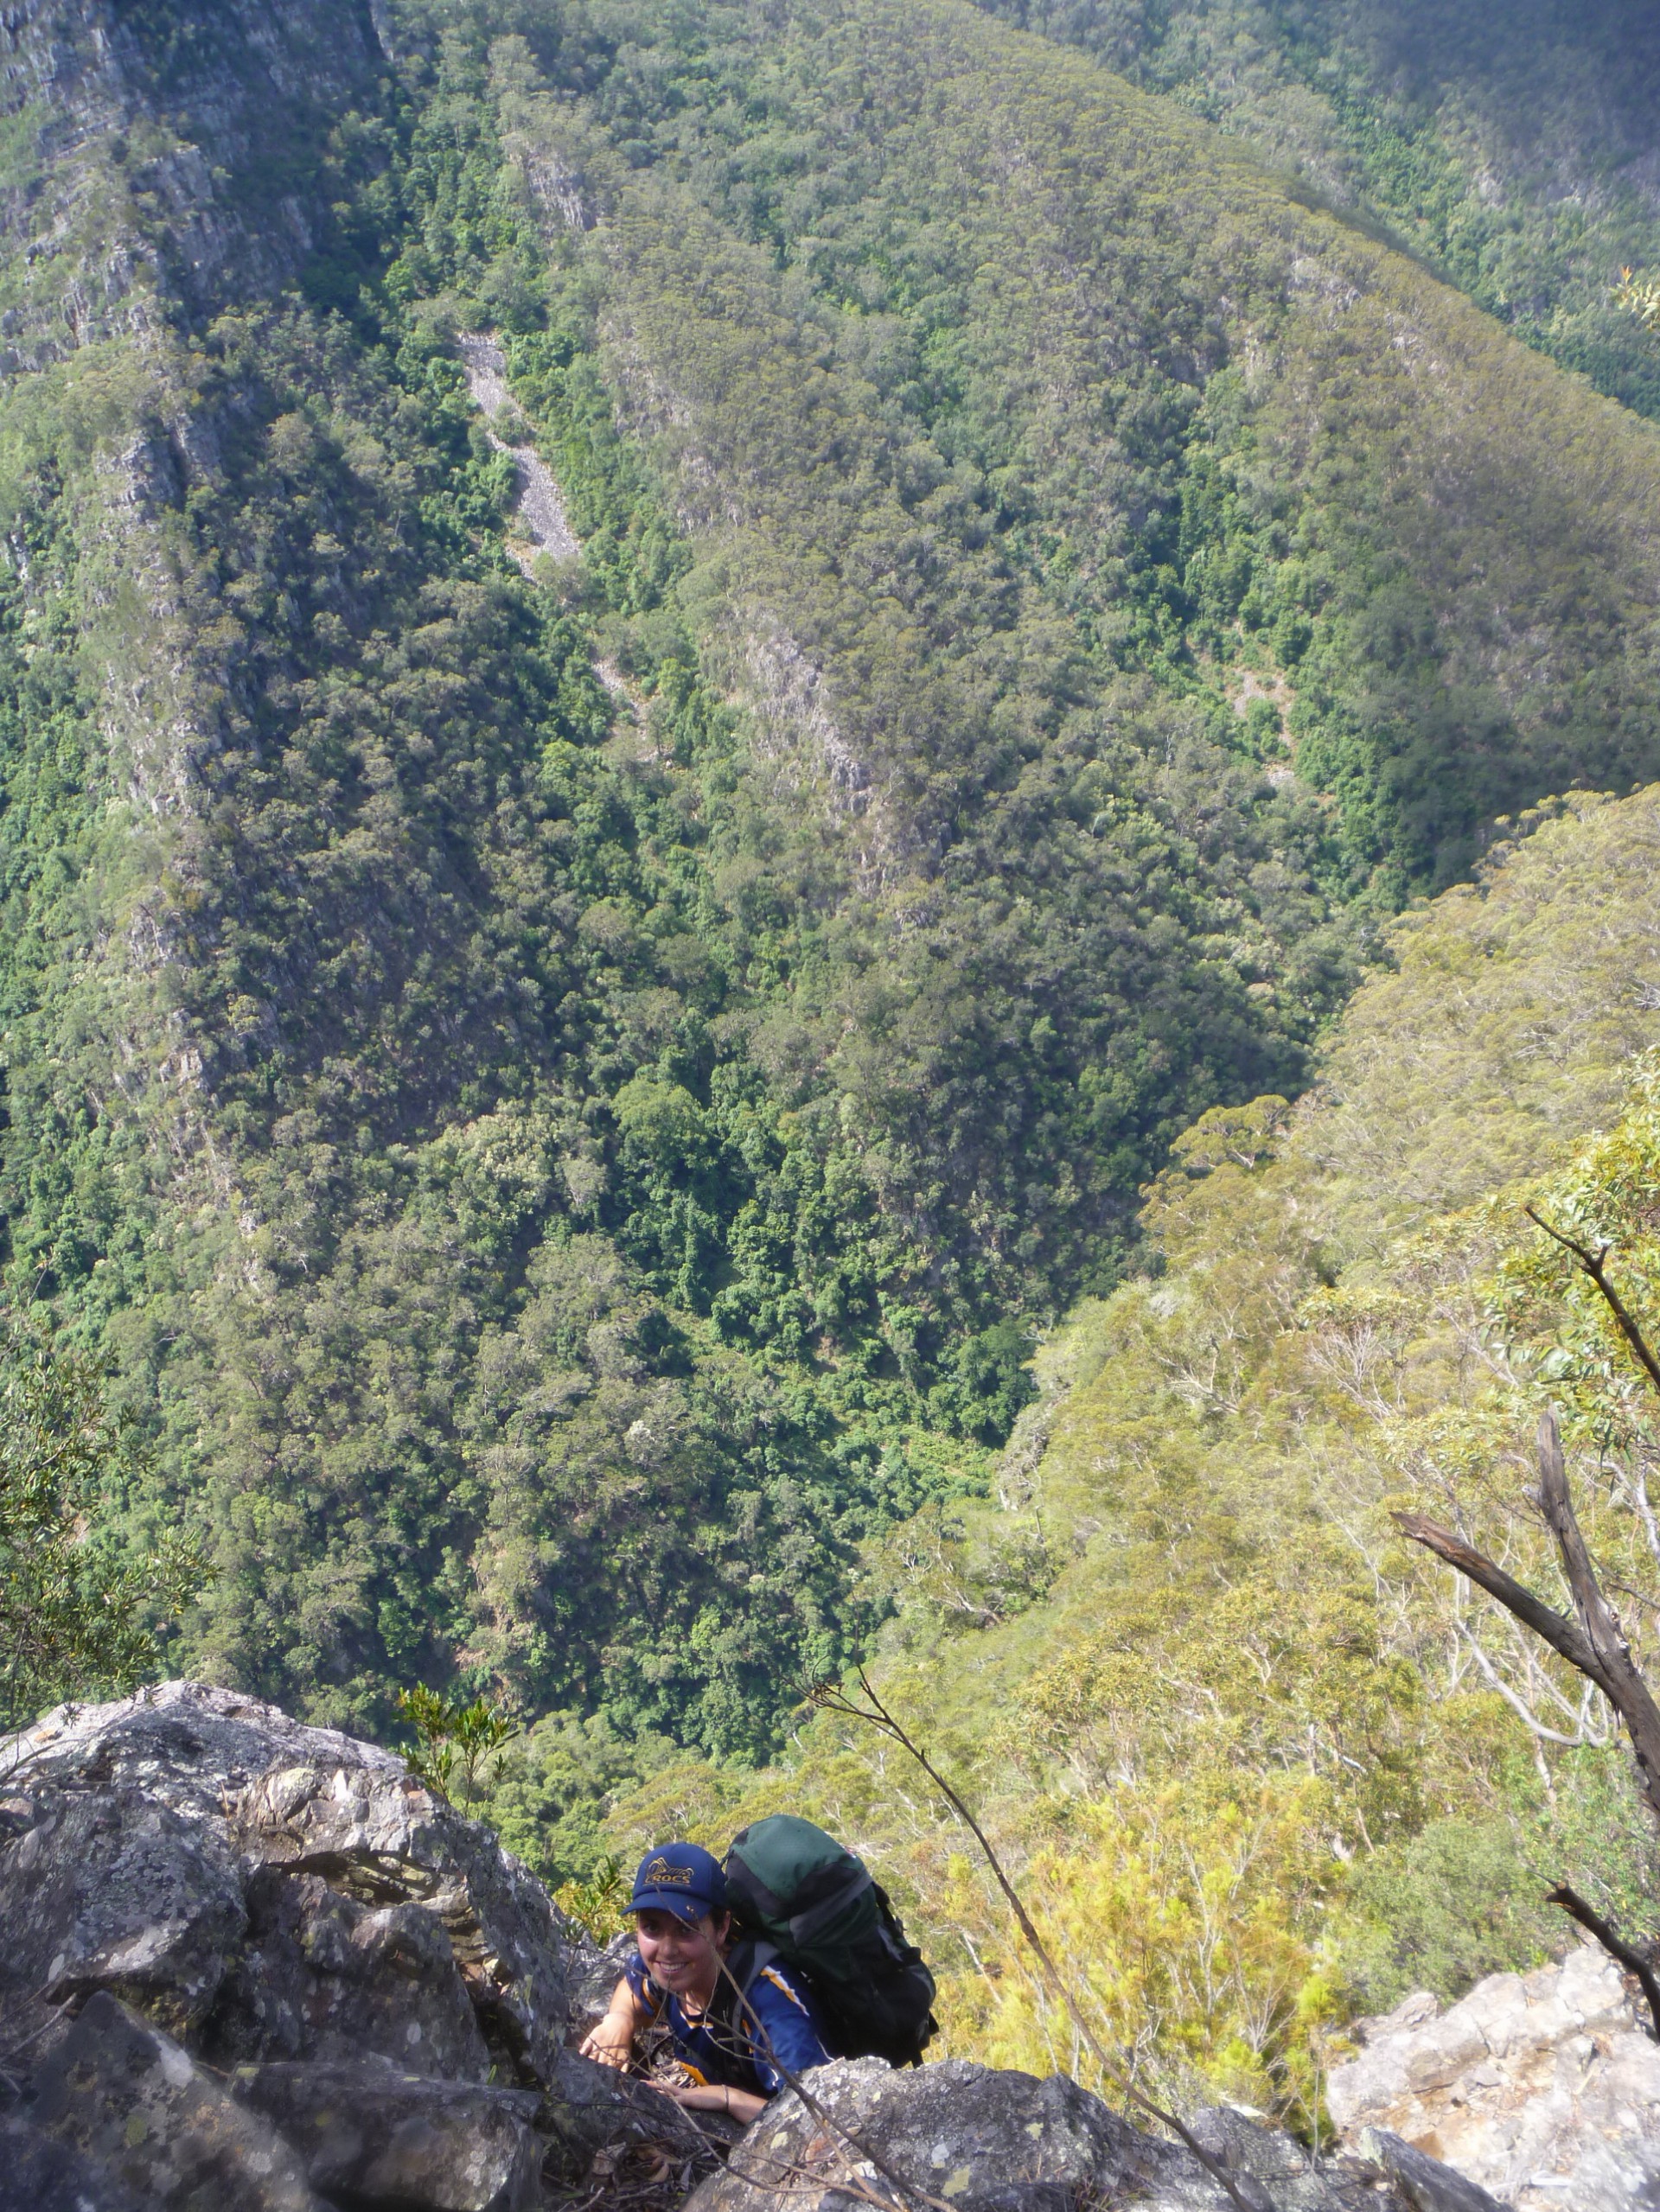 Kimberly ascending the 3rd Spire, with Danae Brook below